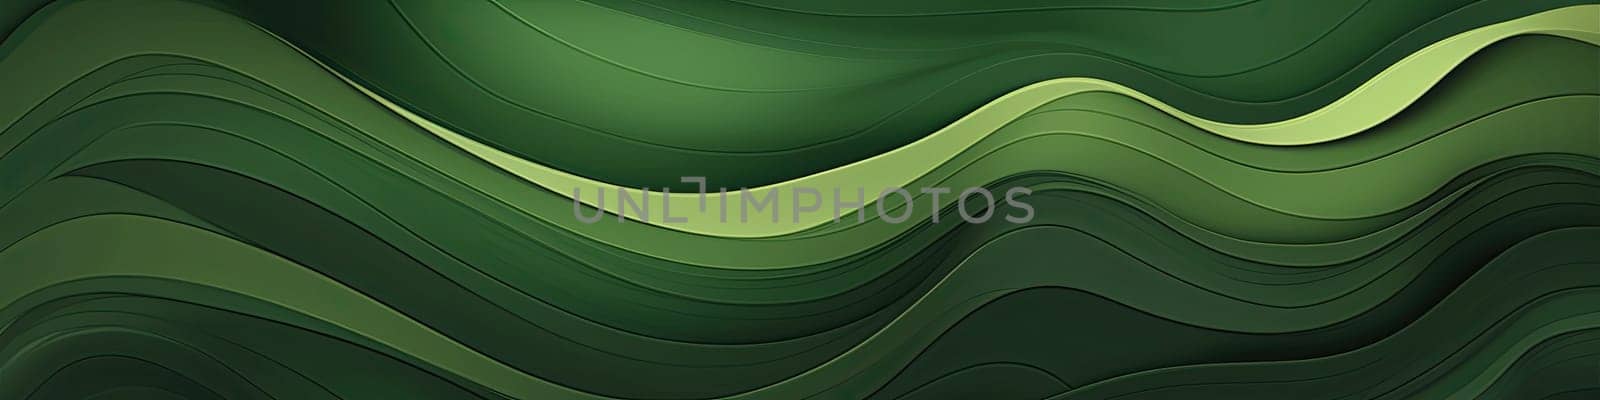 Banner with a green waves background illustration with dark olive drab by Kadula